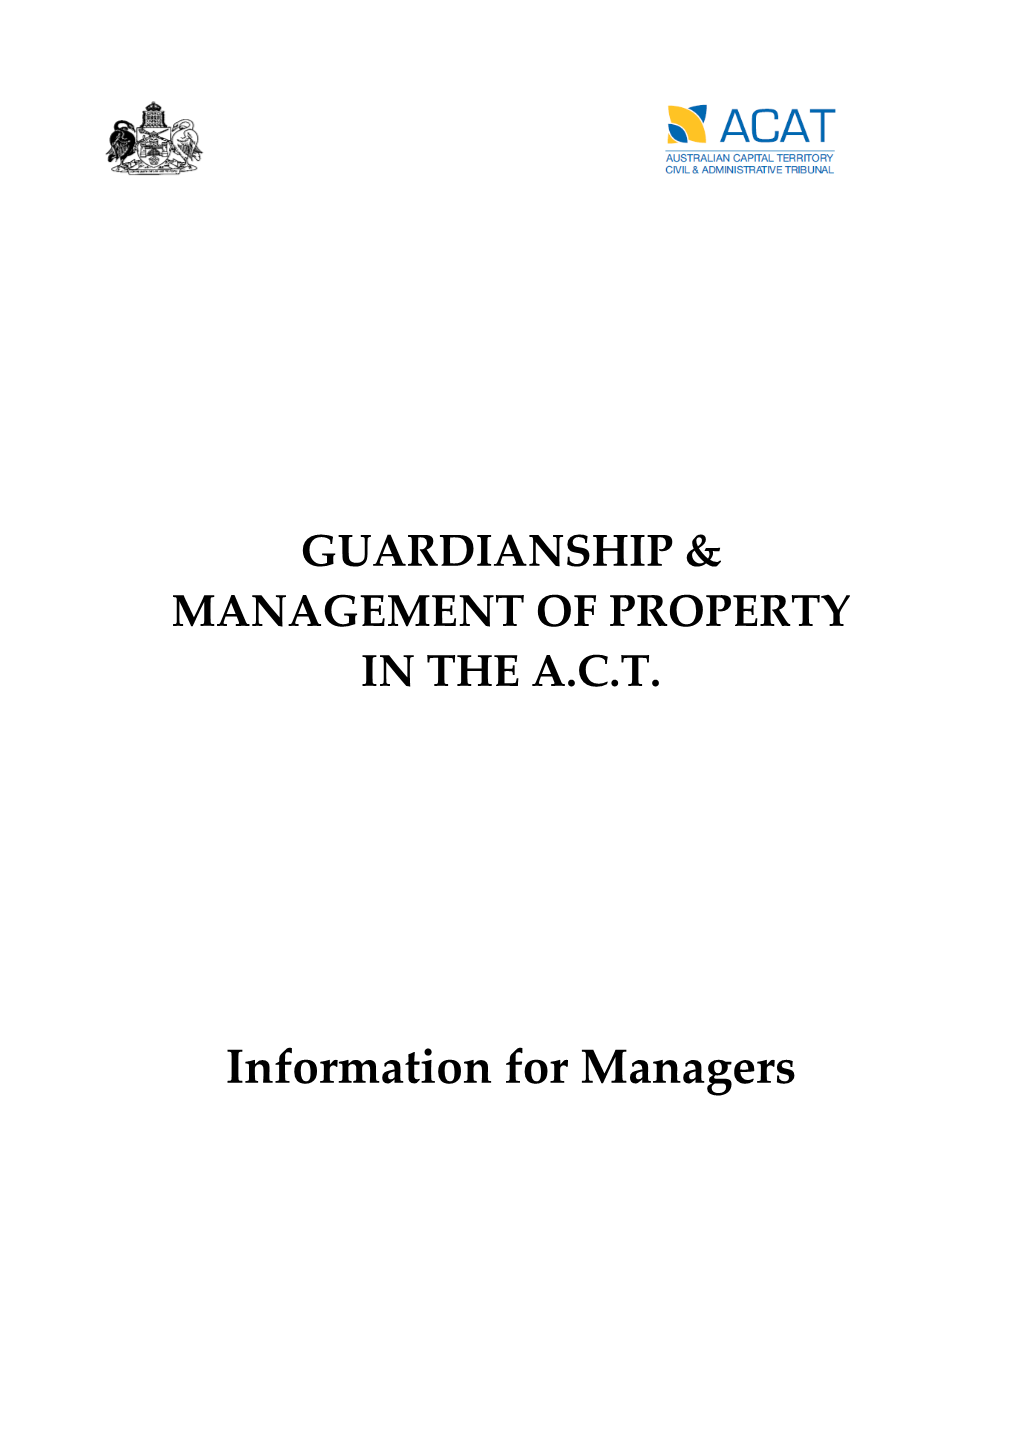 Guardianship & Management of Property in the A.C.T